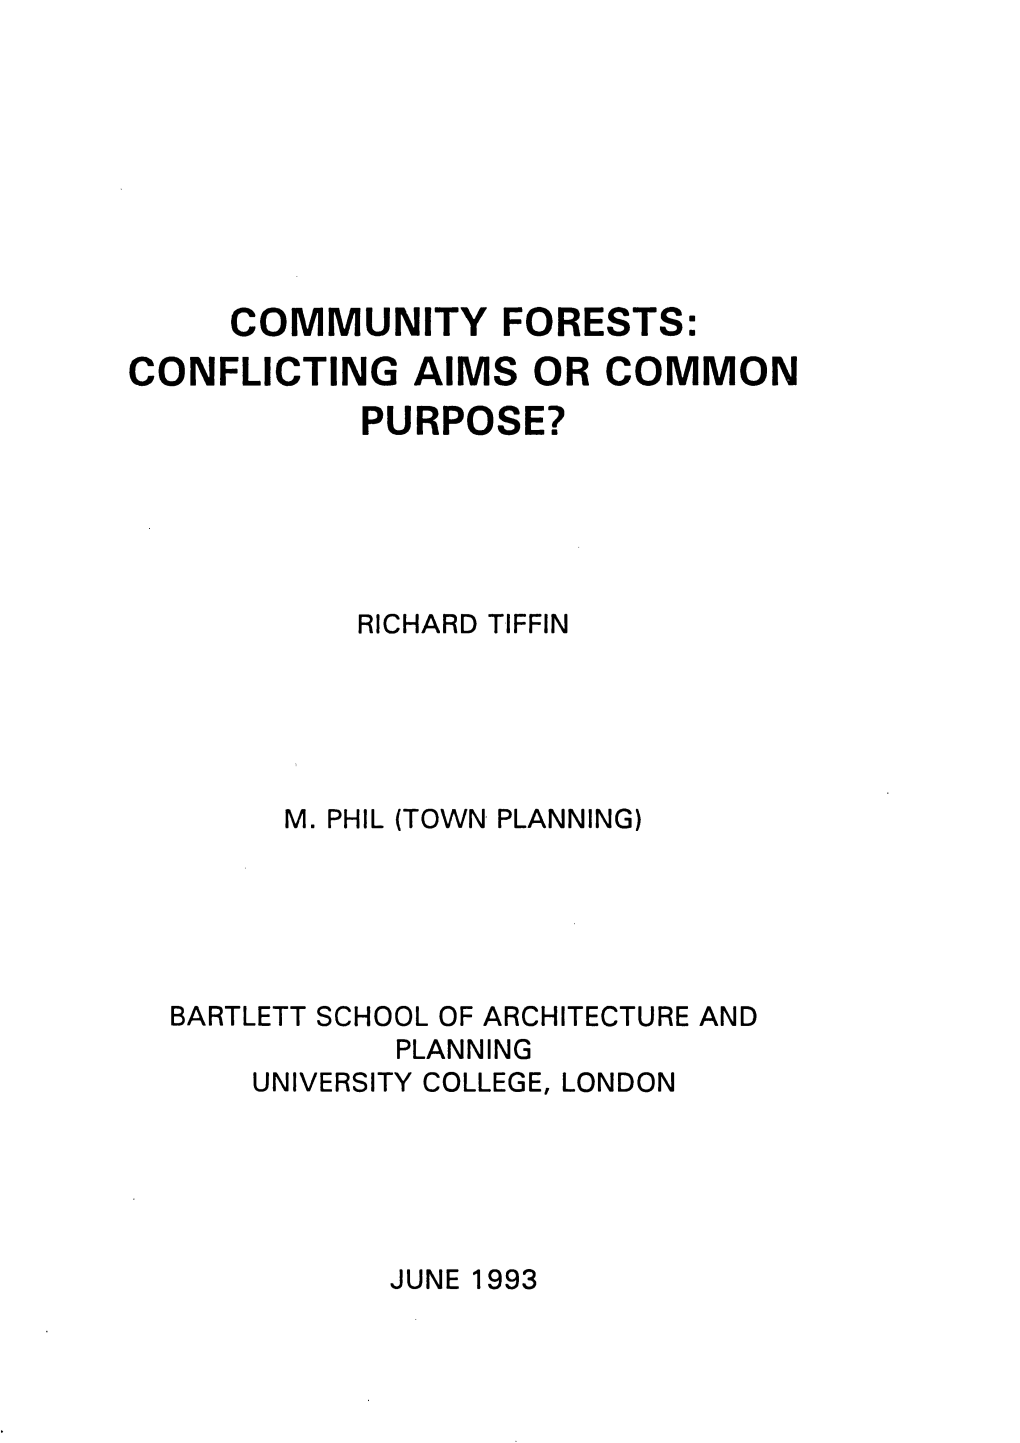 Community Forests: Conflicting Aims Or Common Purpose?